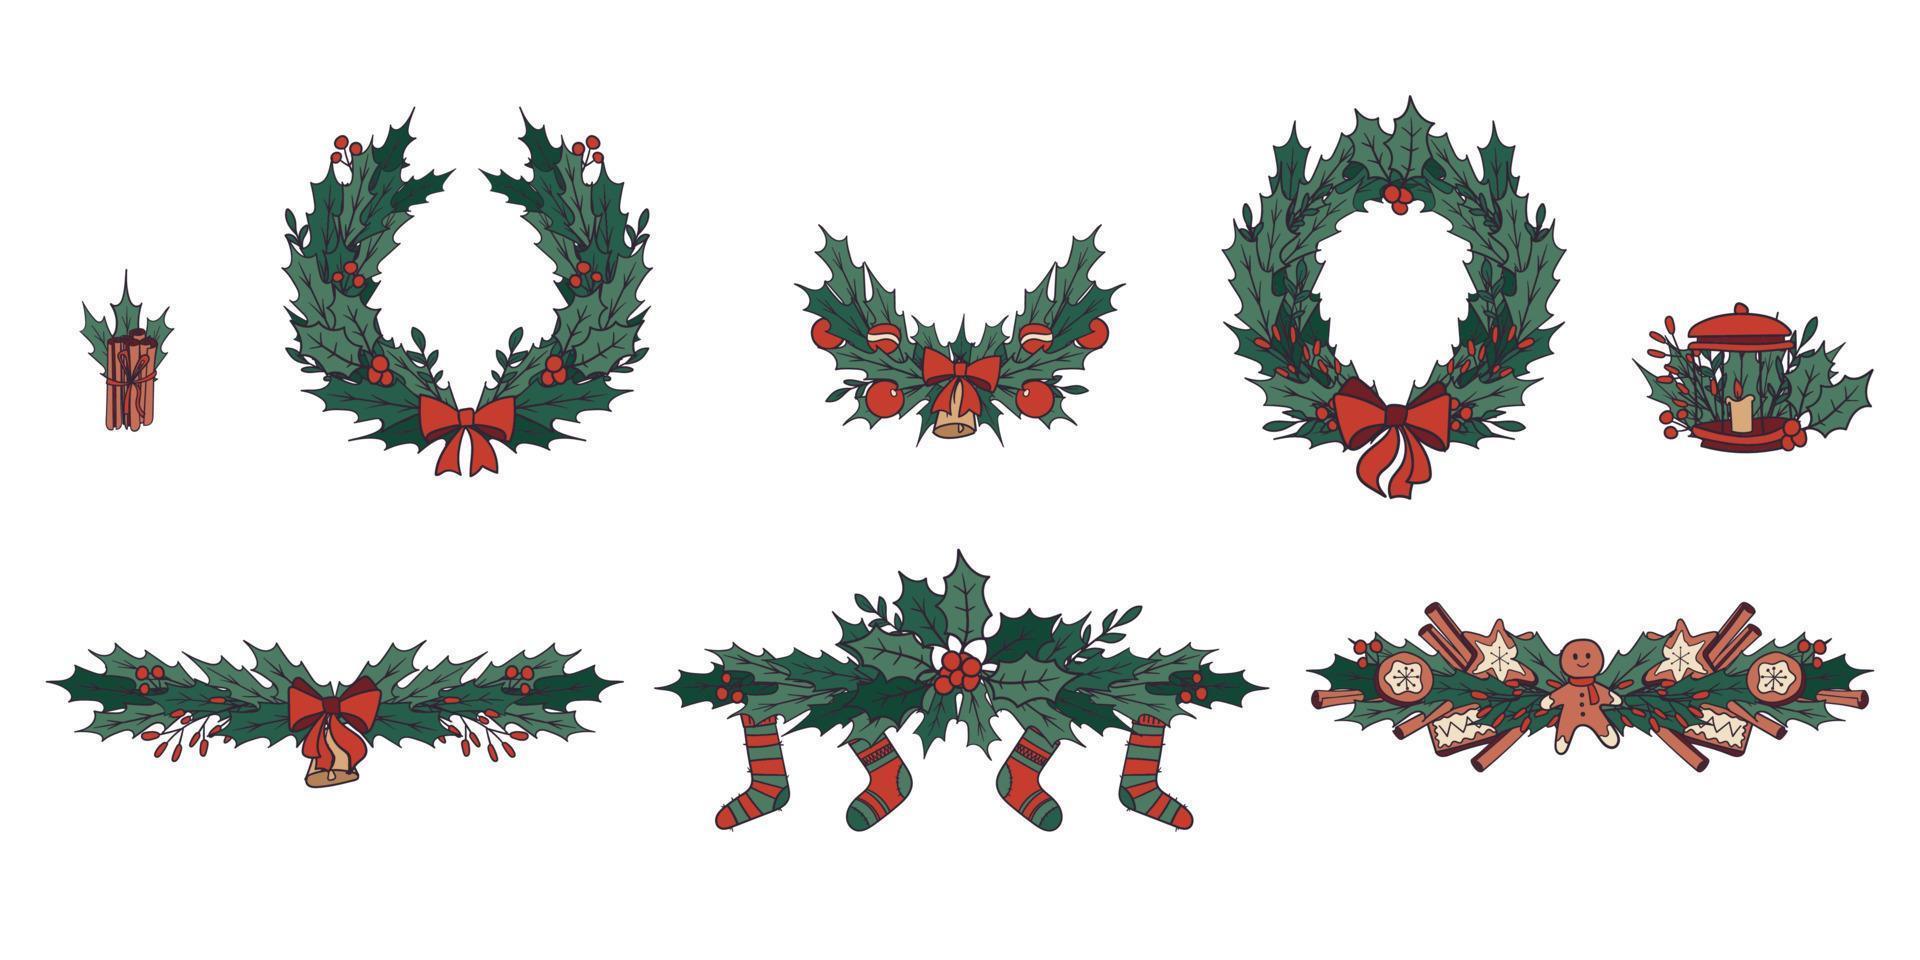 Christmas design elements set with mistletoe, berries, balls, socks, trees, cookies, presents, candles, lantern, leaves. Perfect for holiday invitations, winter greeting cards, wallpaper vector